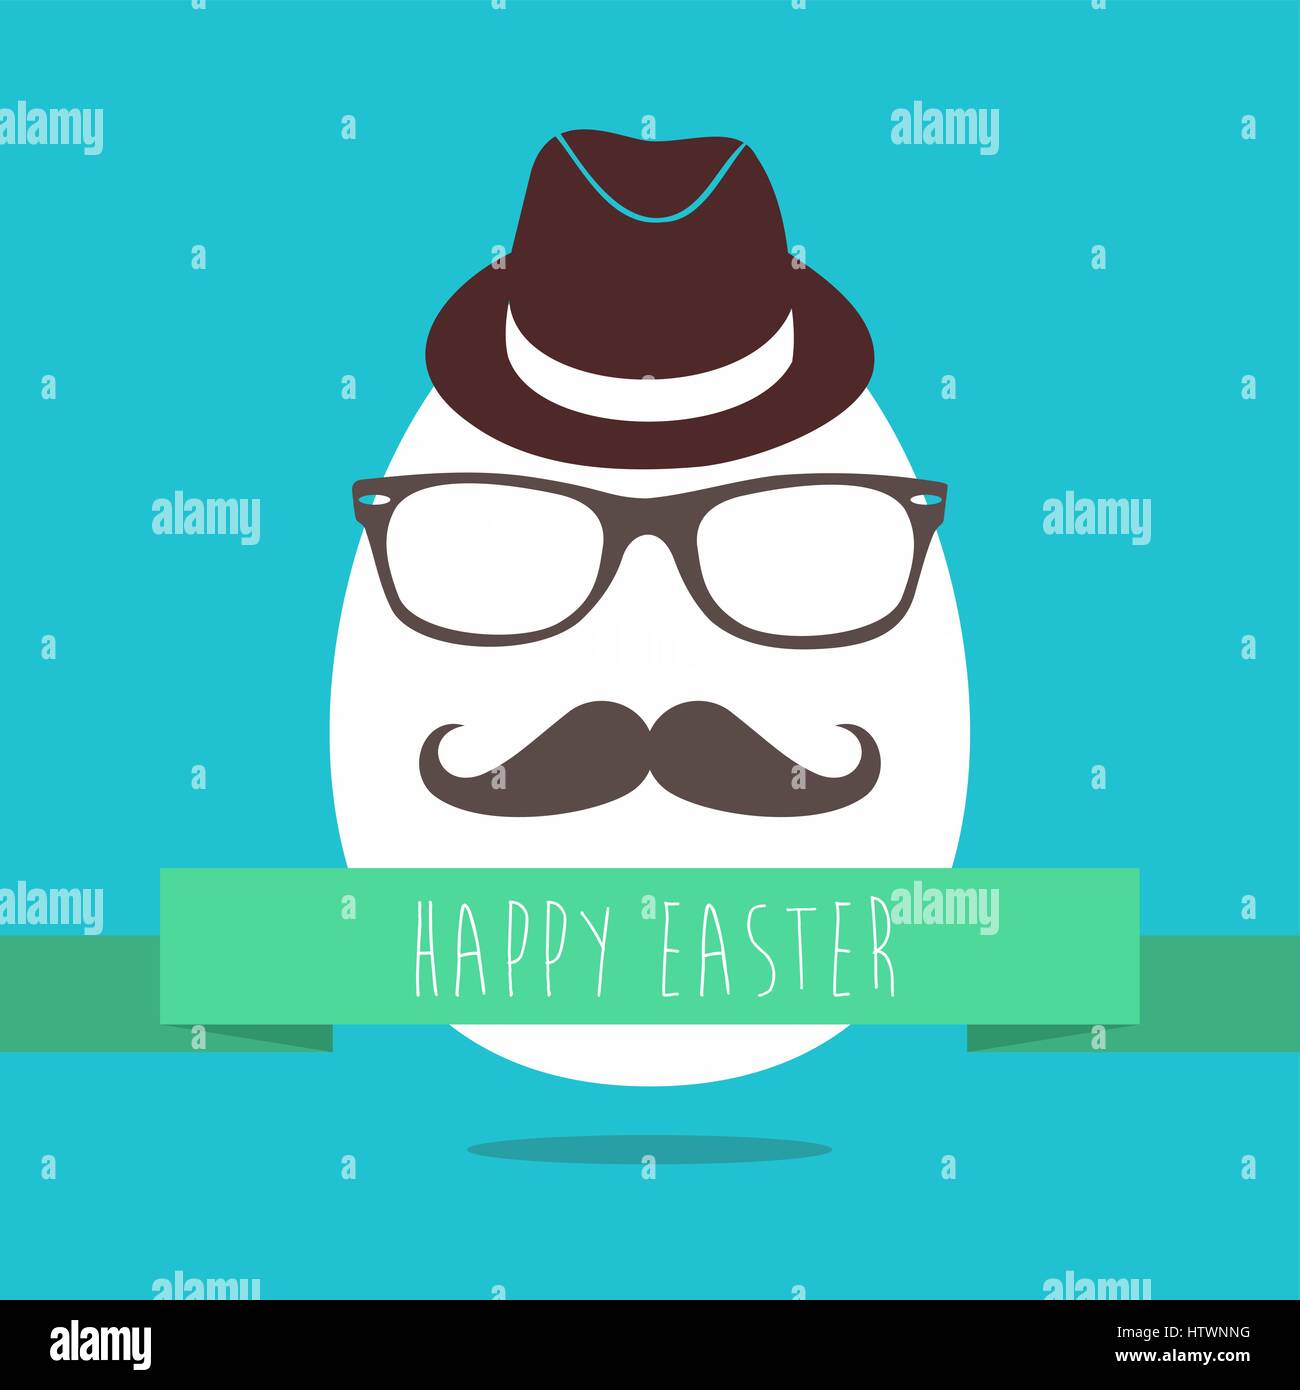 Funny Easter greeting card design of hipster egg with glasses and mustache for holiday celebration. EPS10 vector. Stock Vector